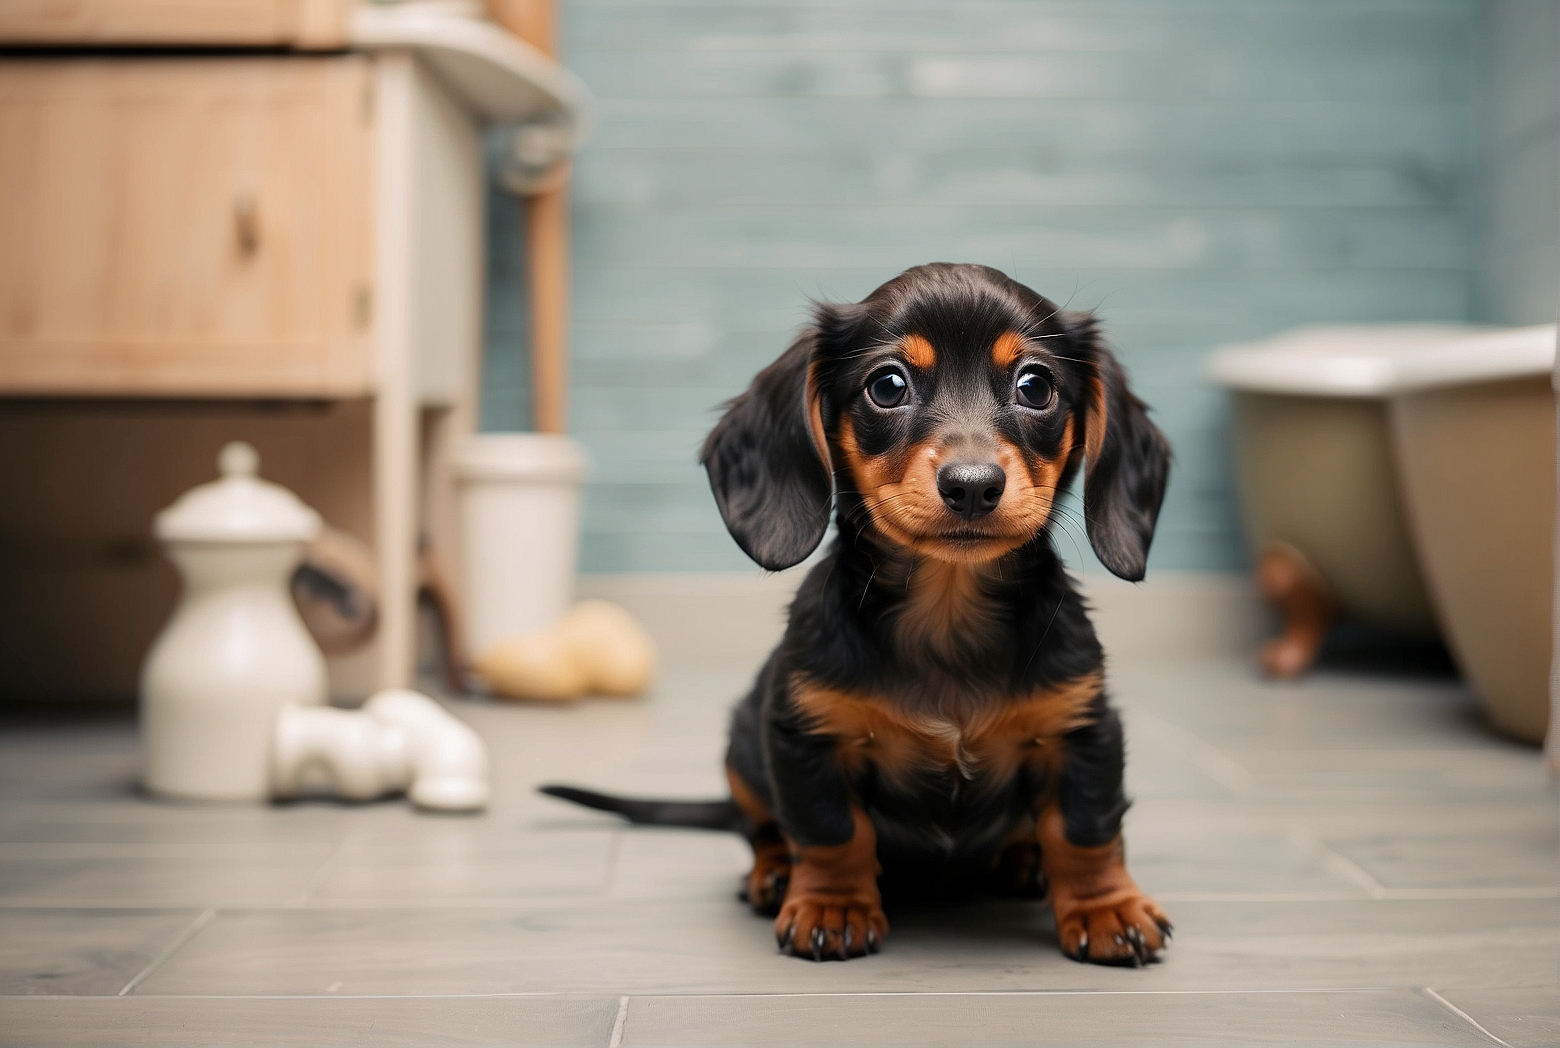 How To Toilet Train A Dachshund Puppy